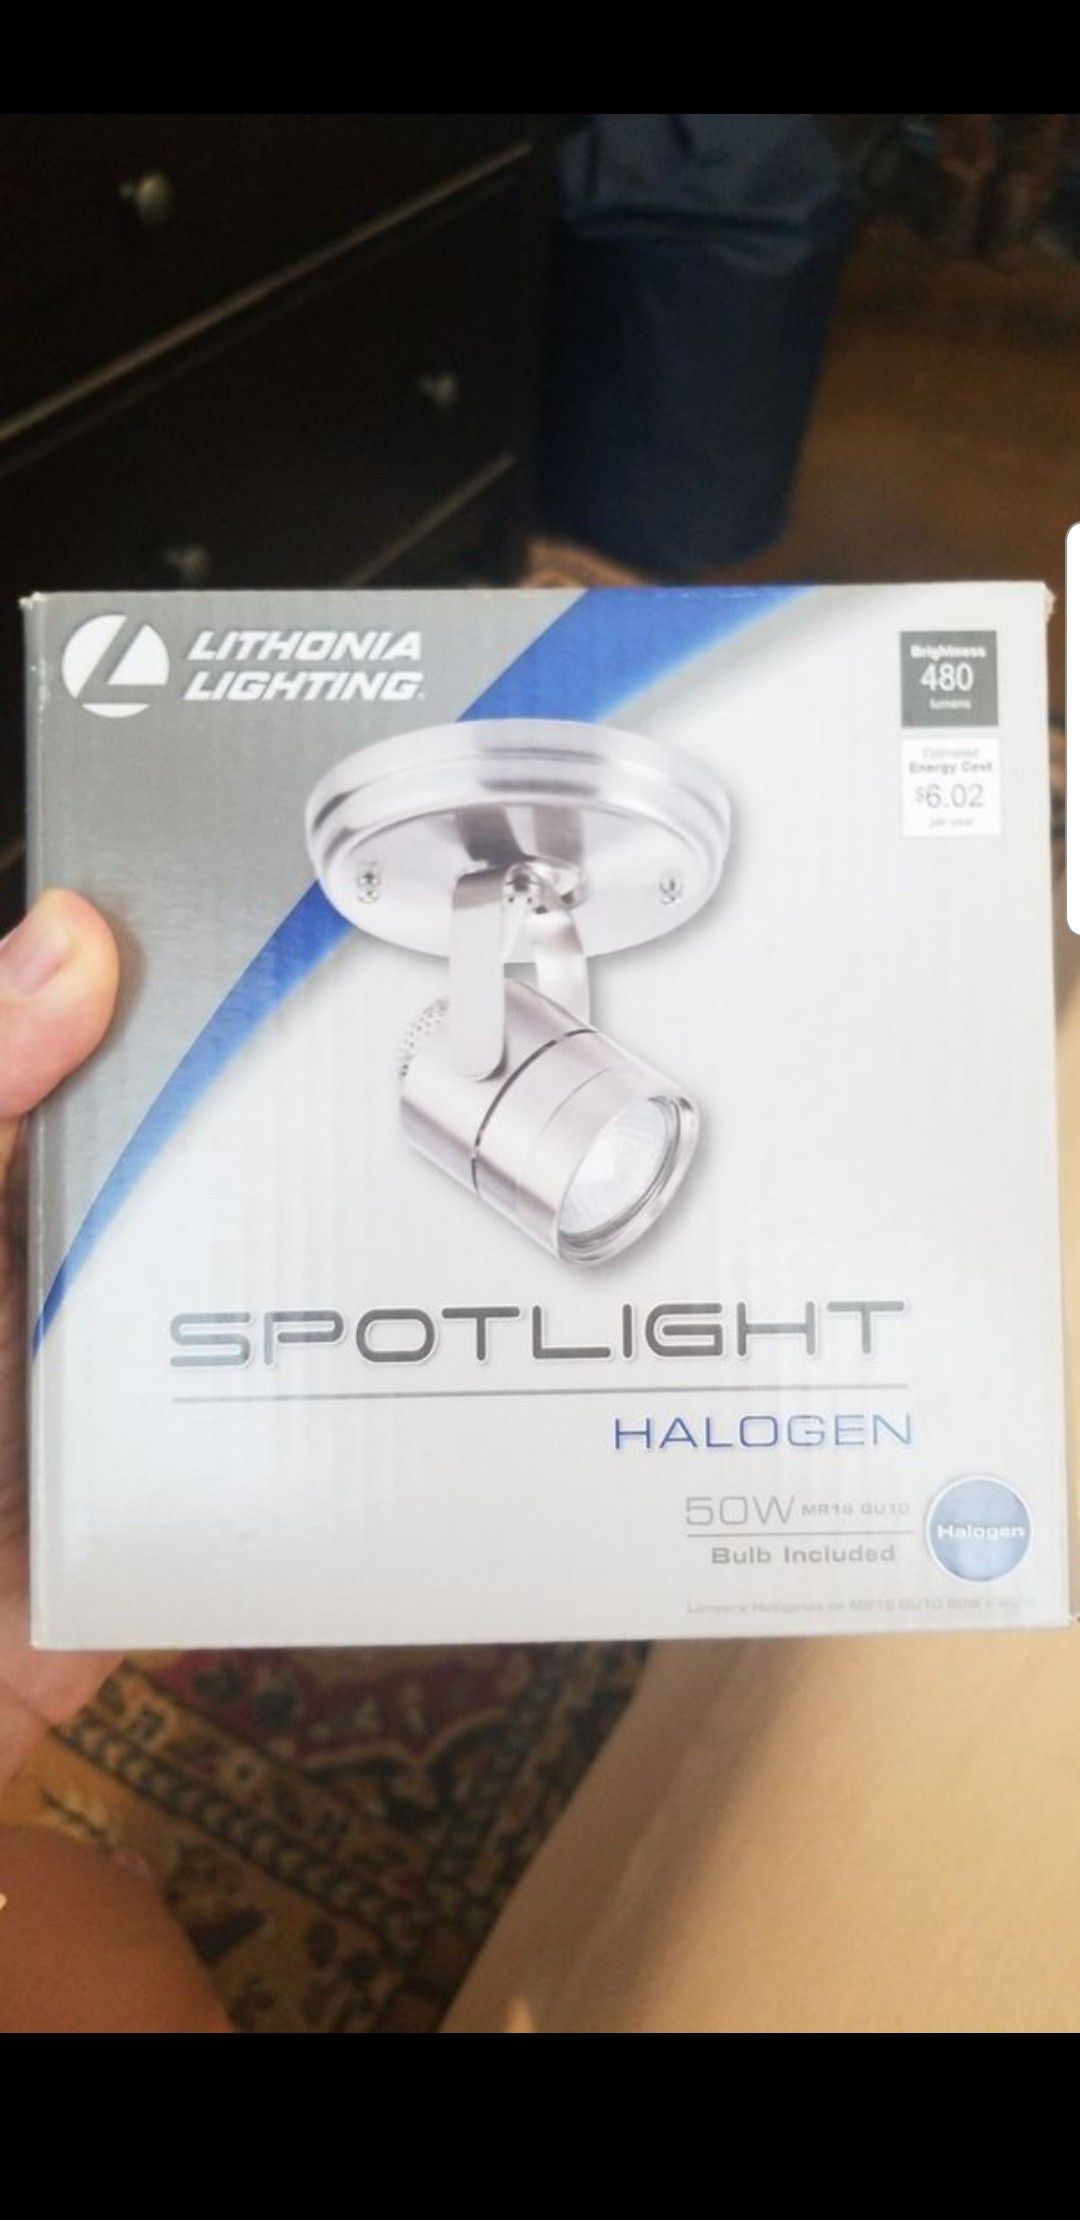 Brushed nickel light fixture - still in box, never used